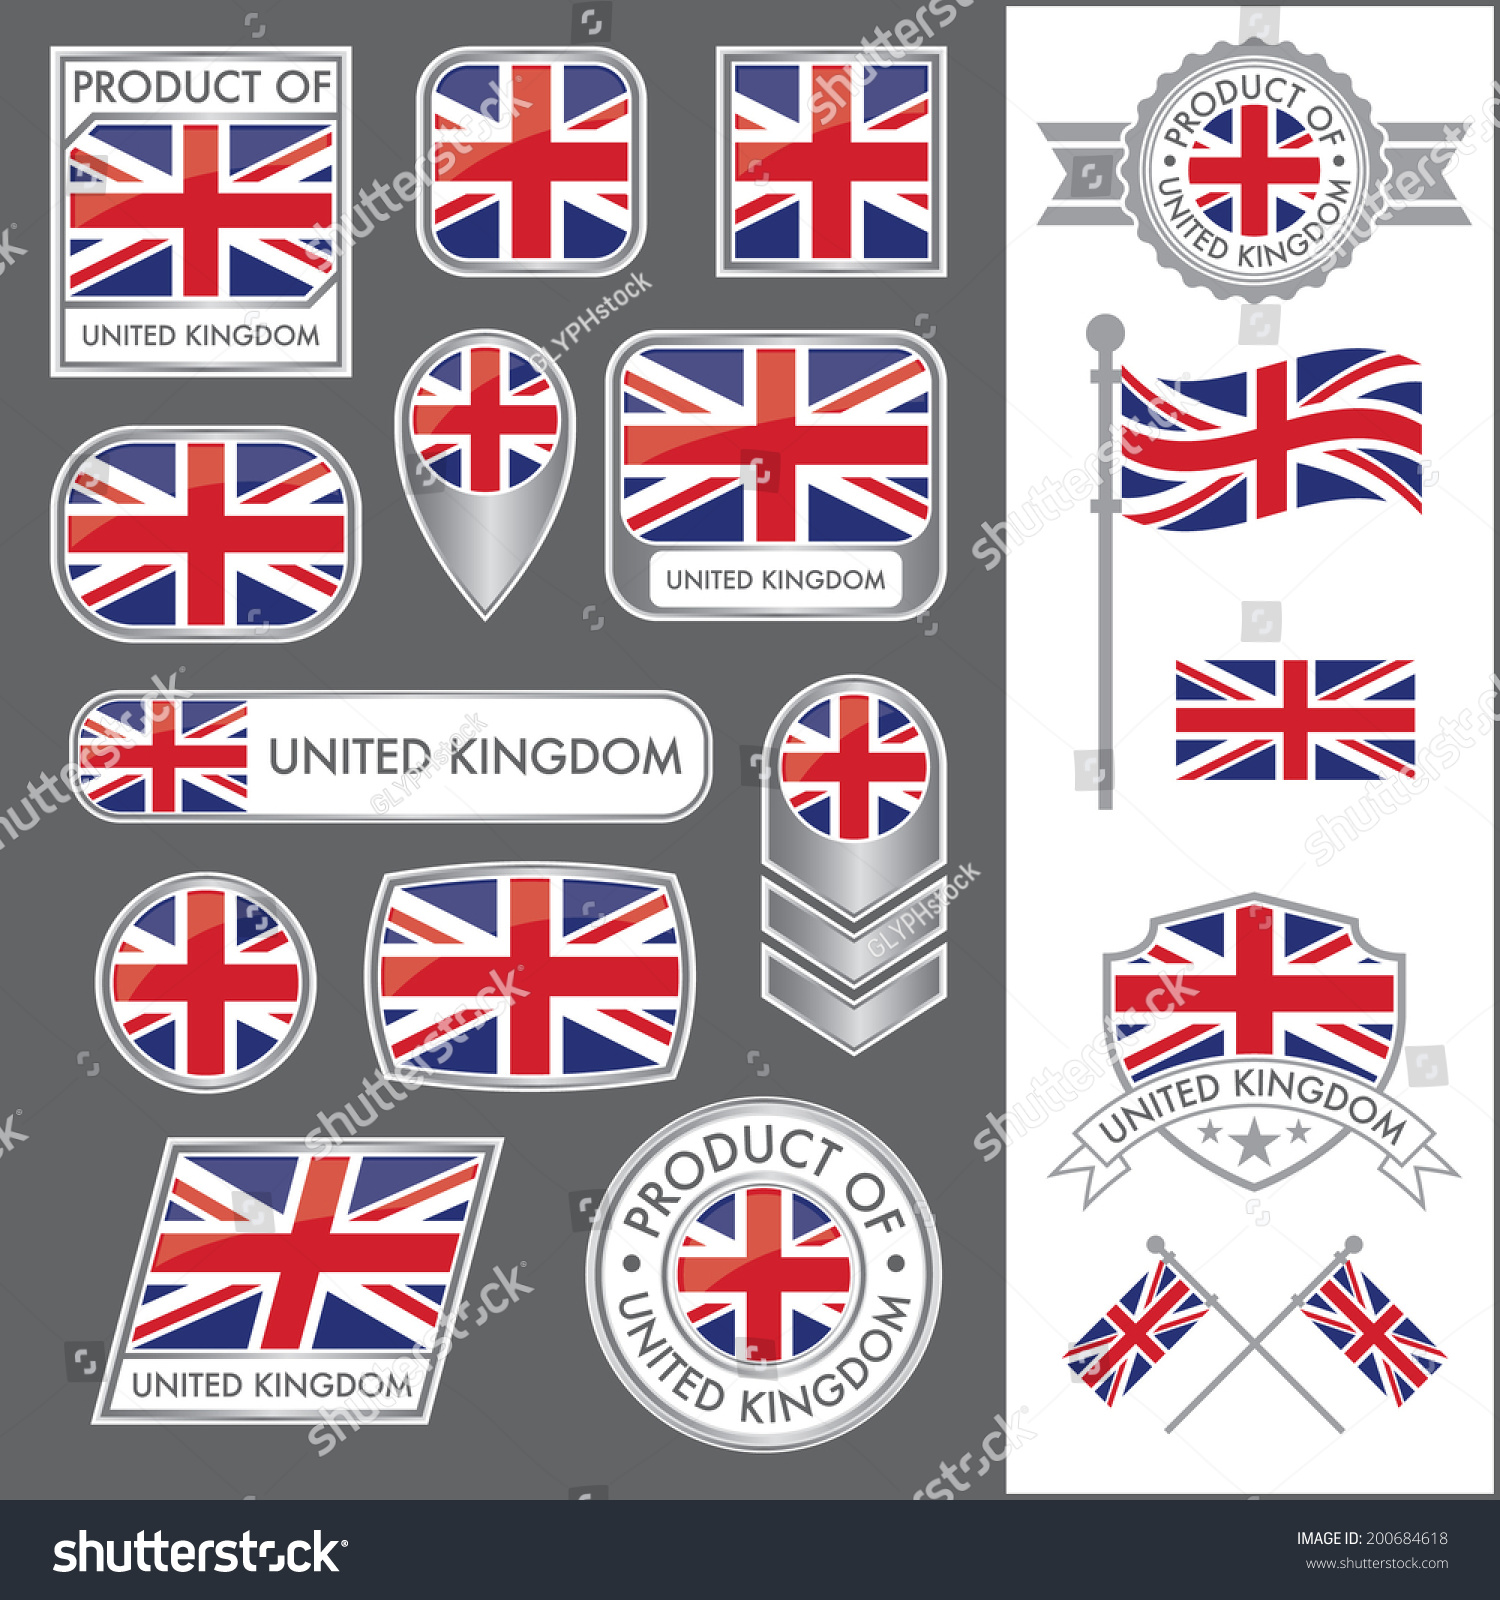 SVG of A huge vector collection of British flags in multiple different styles. In total there are 17 unique treatments that will be useful for a variety of applications. svg